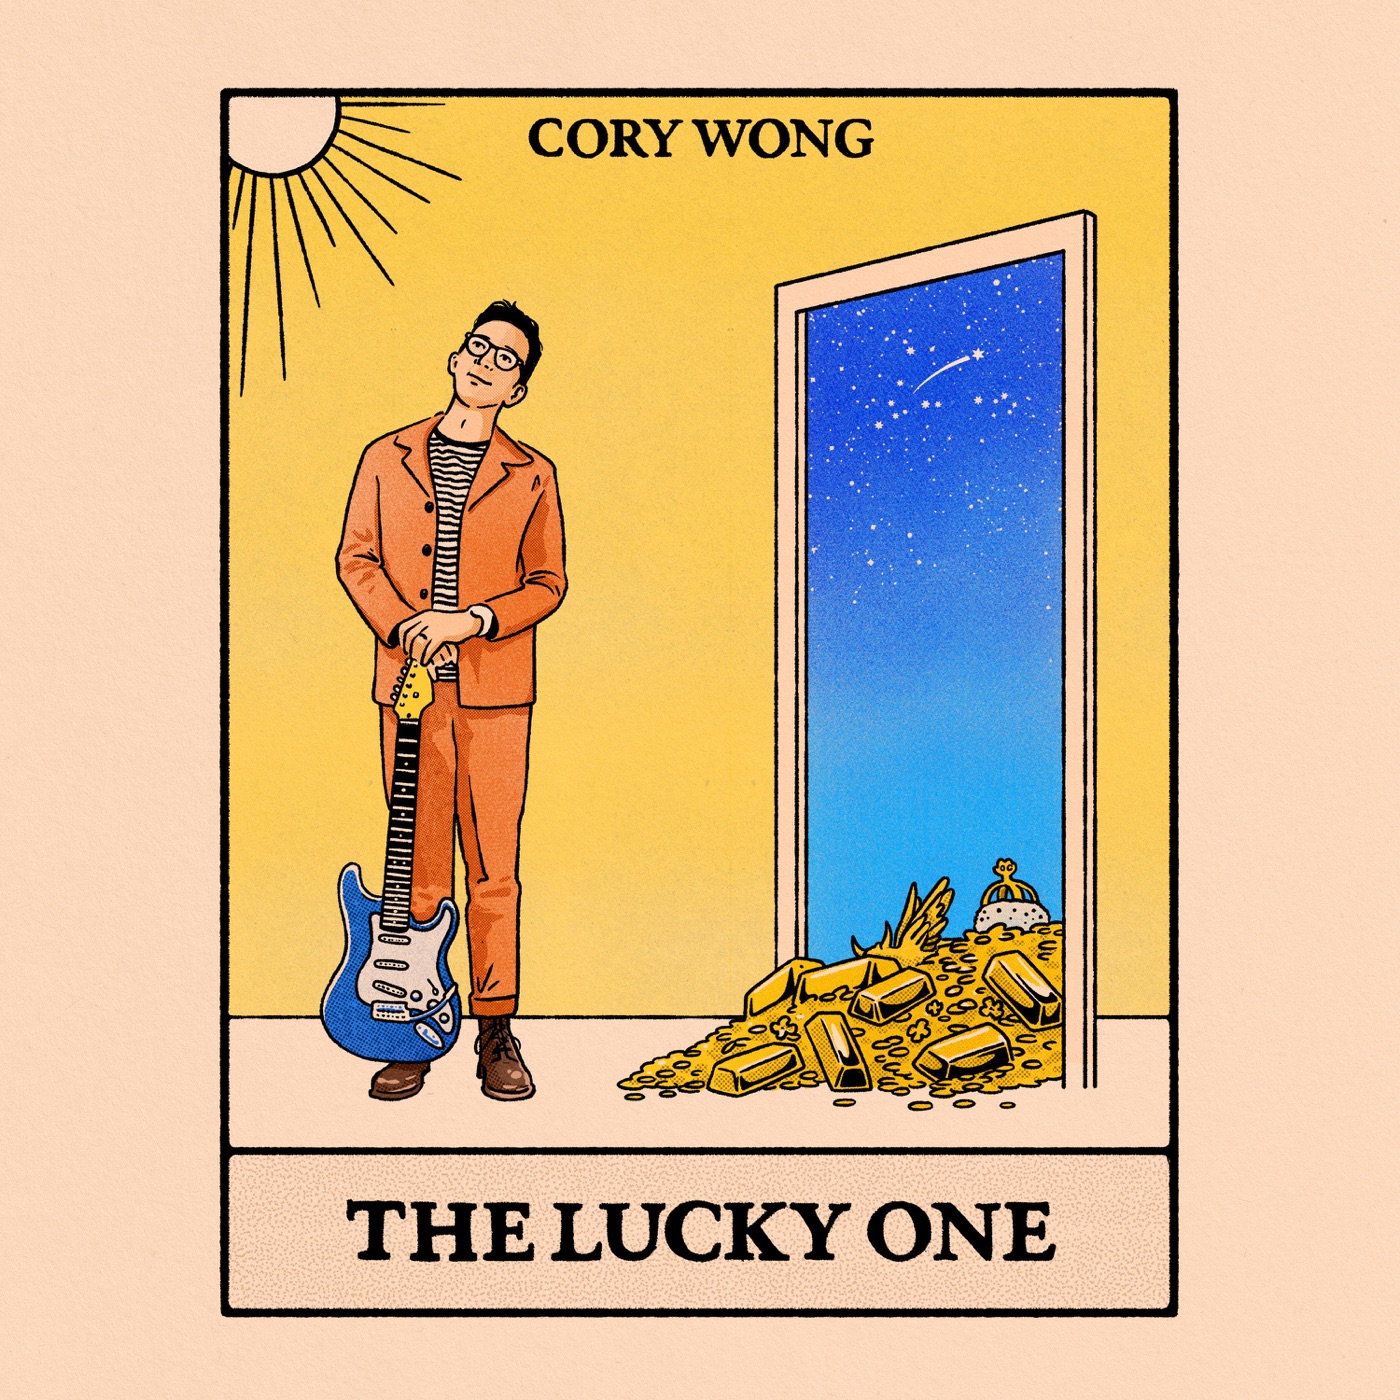 The Lucky One by Cory Wong